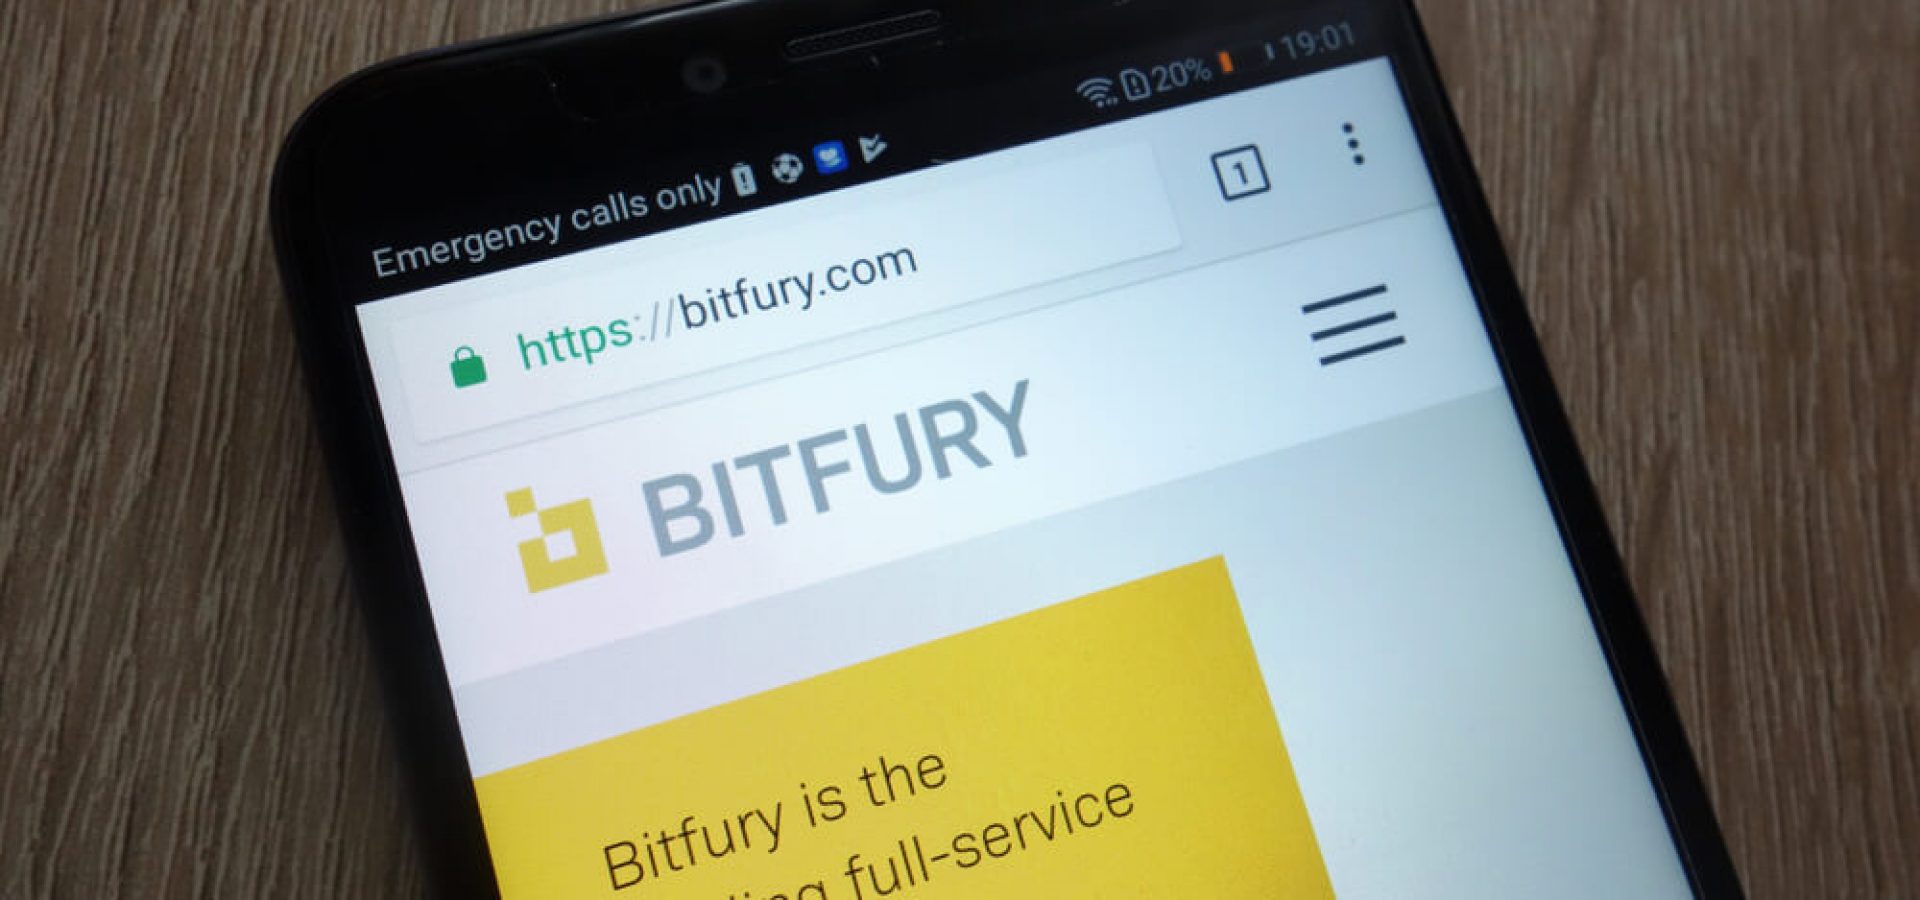 Block Chain: The Bitfury Group sign on a modern smartphone.